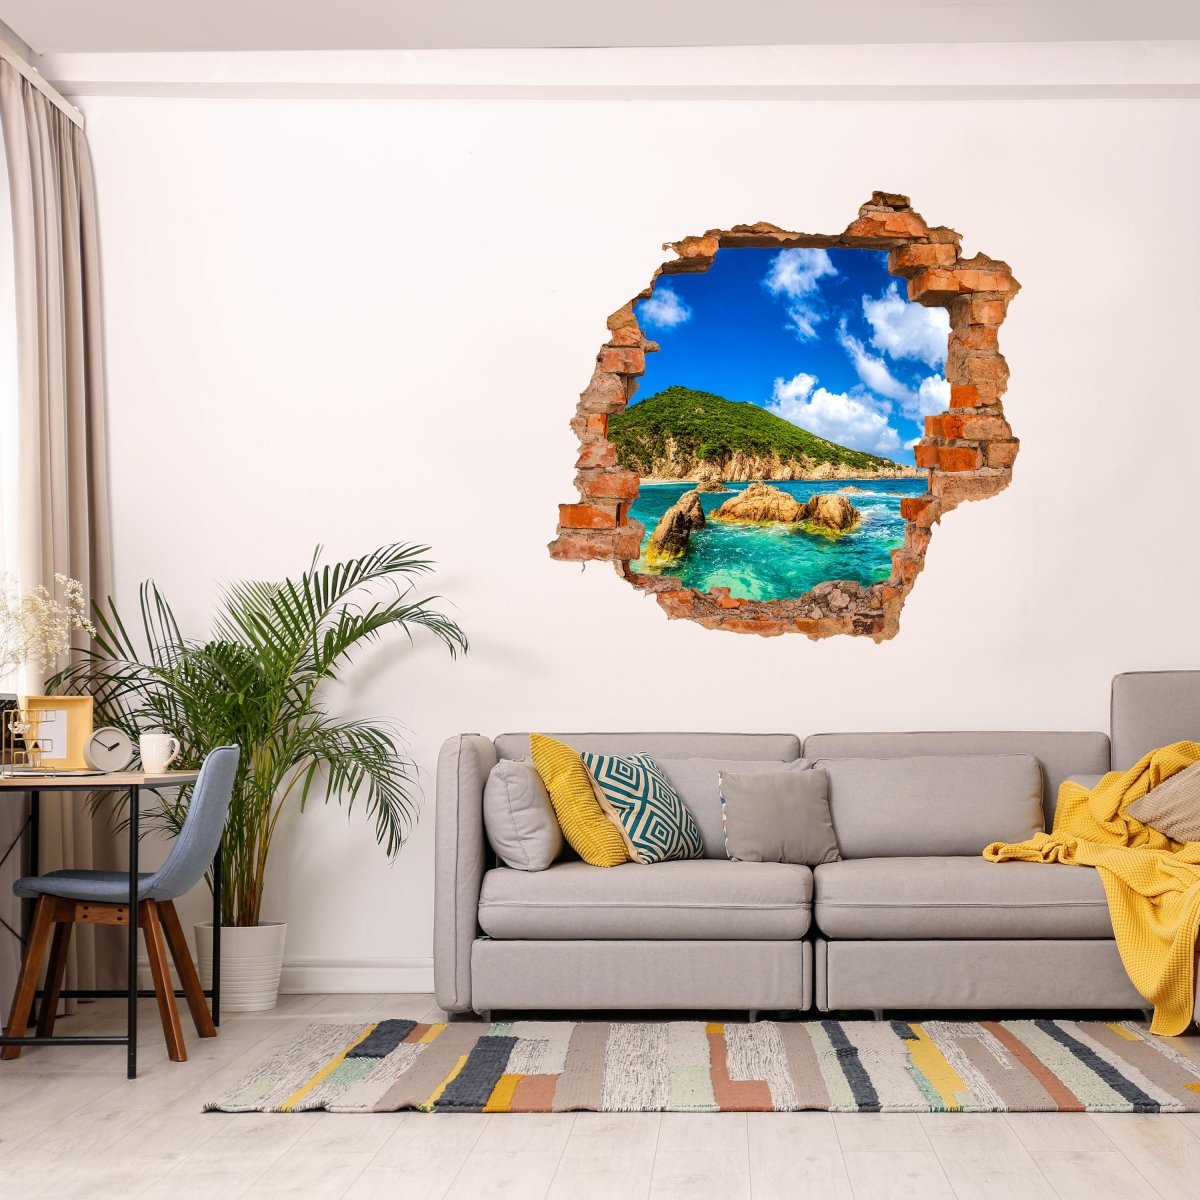 3D wall sticker lonely island, sea, clouds, rocks - Wall Decal M1147